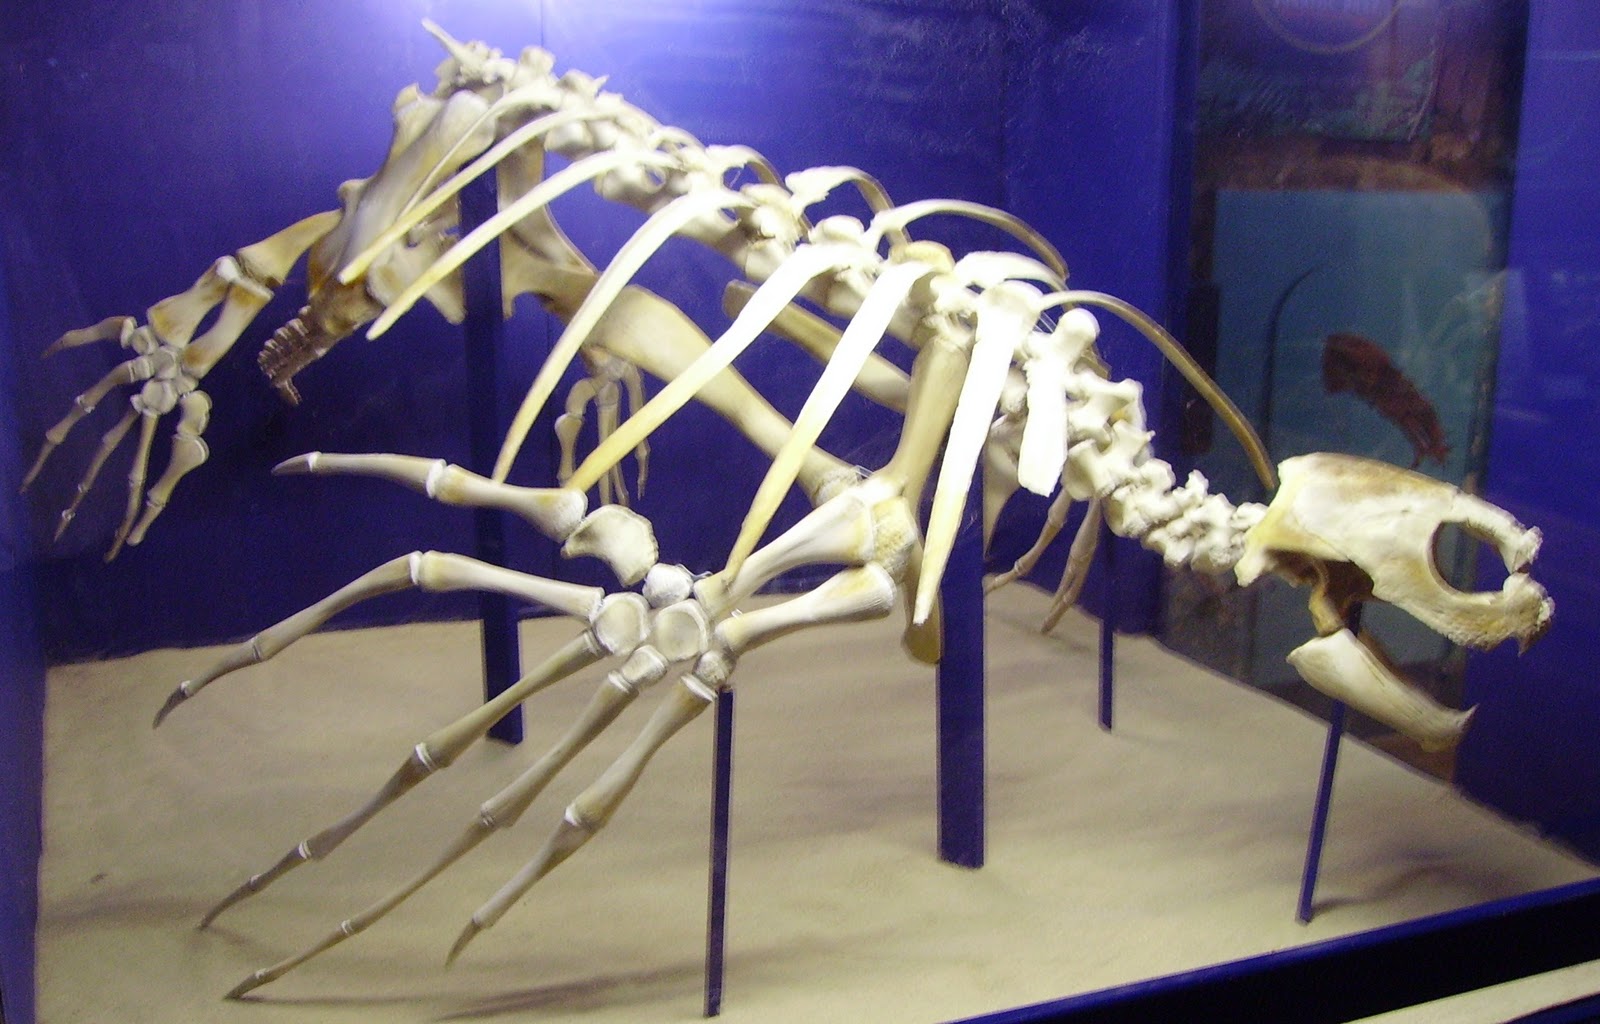 What are some facts about a turtle's skeleton?